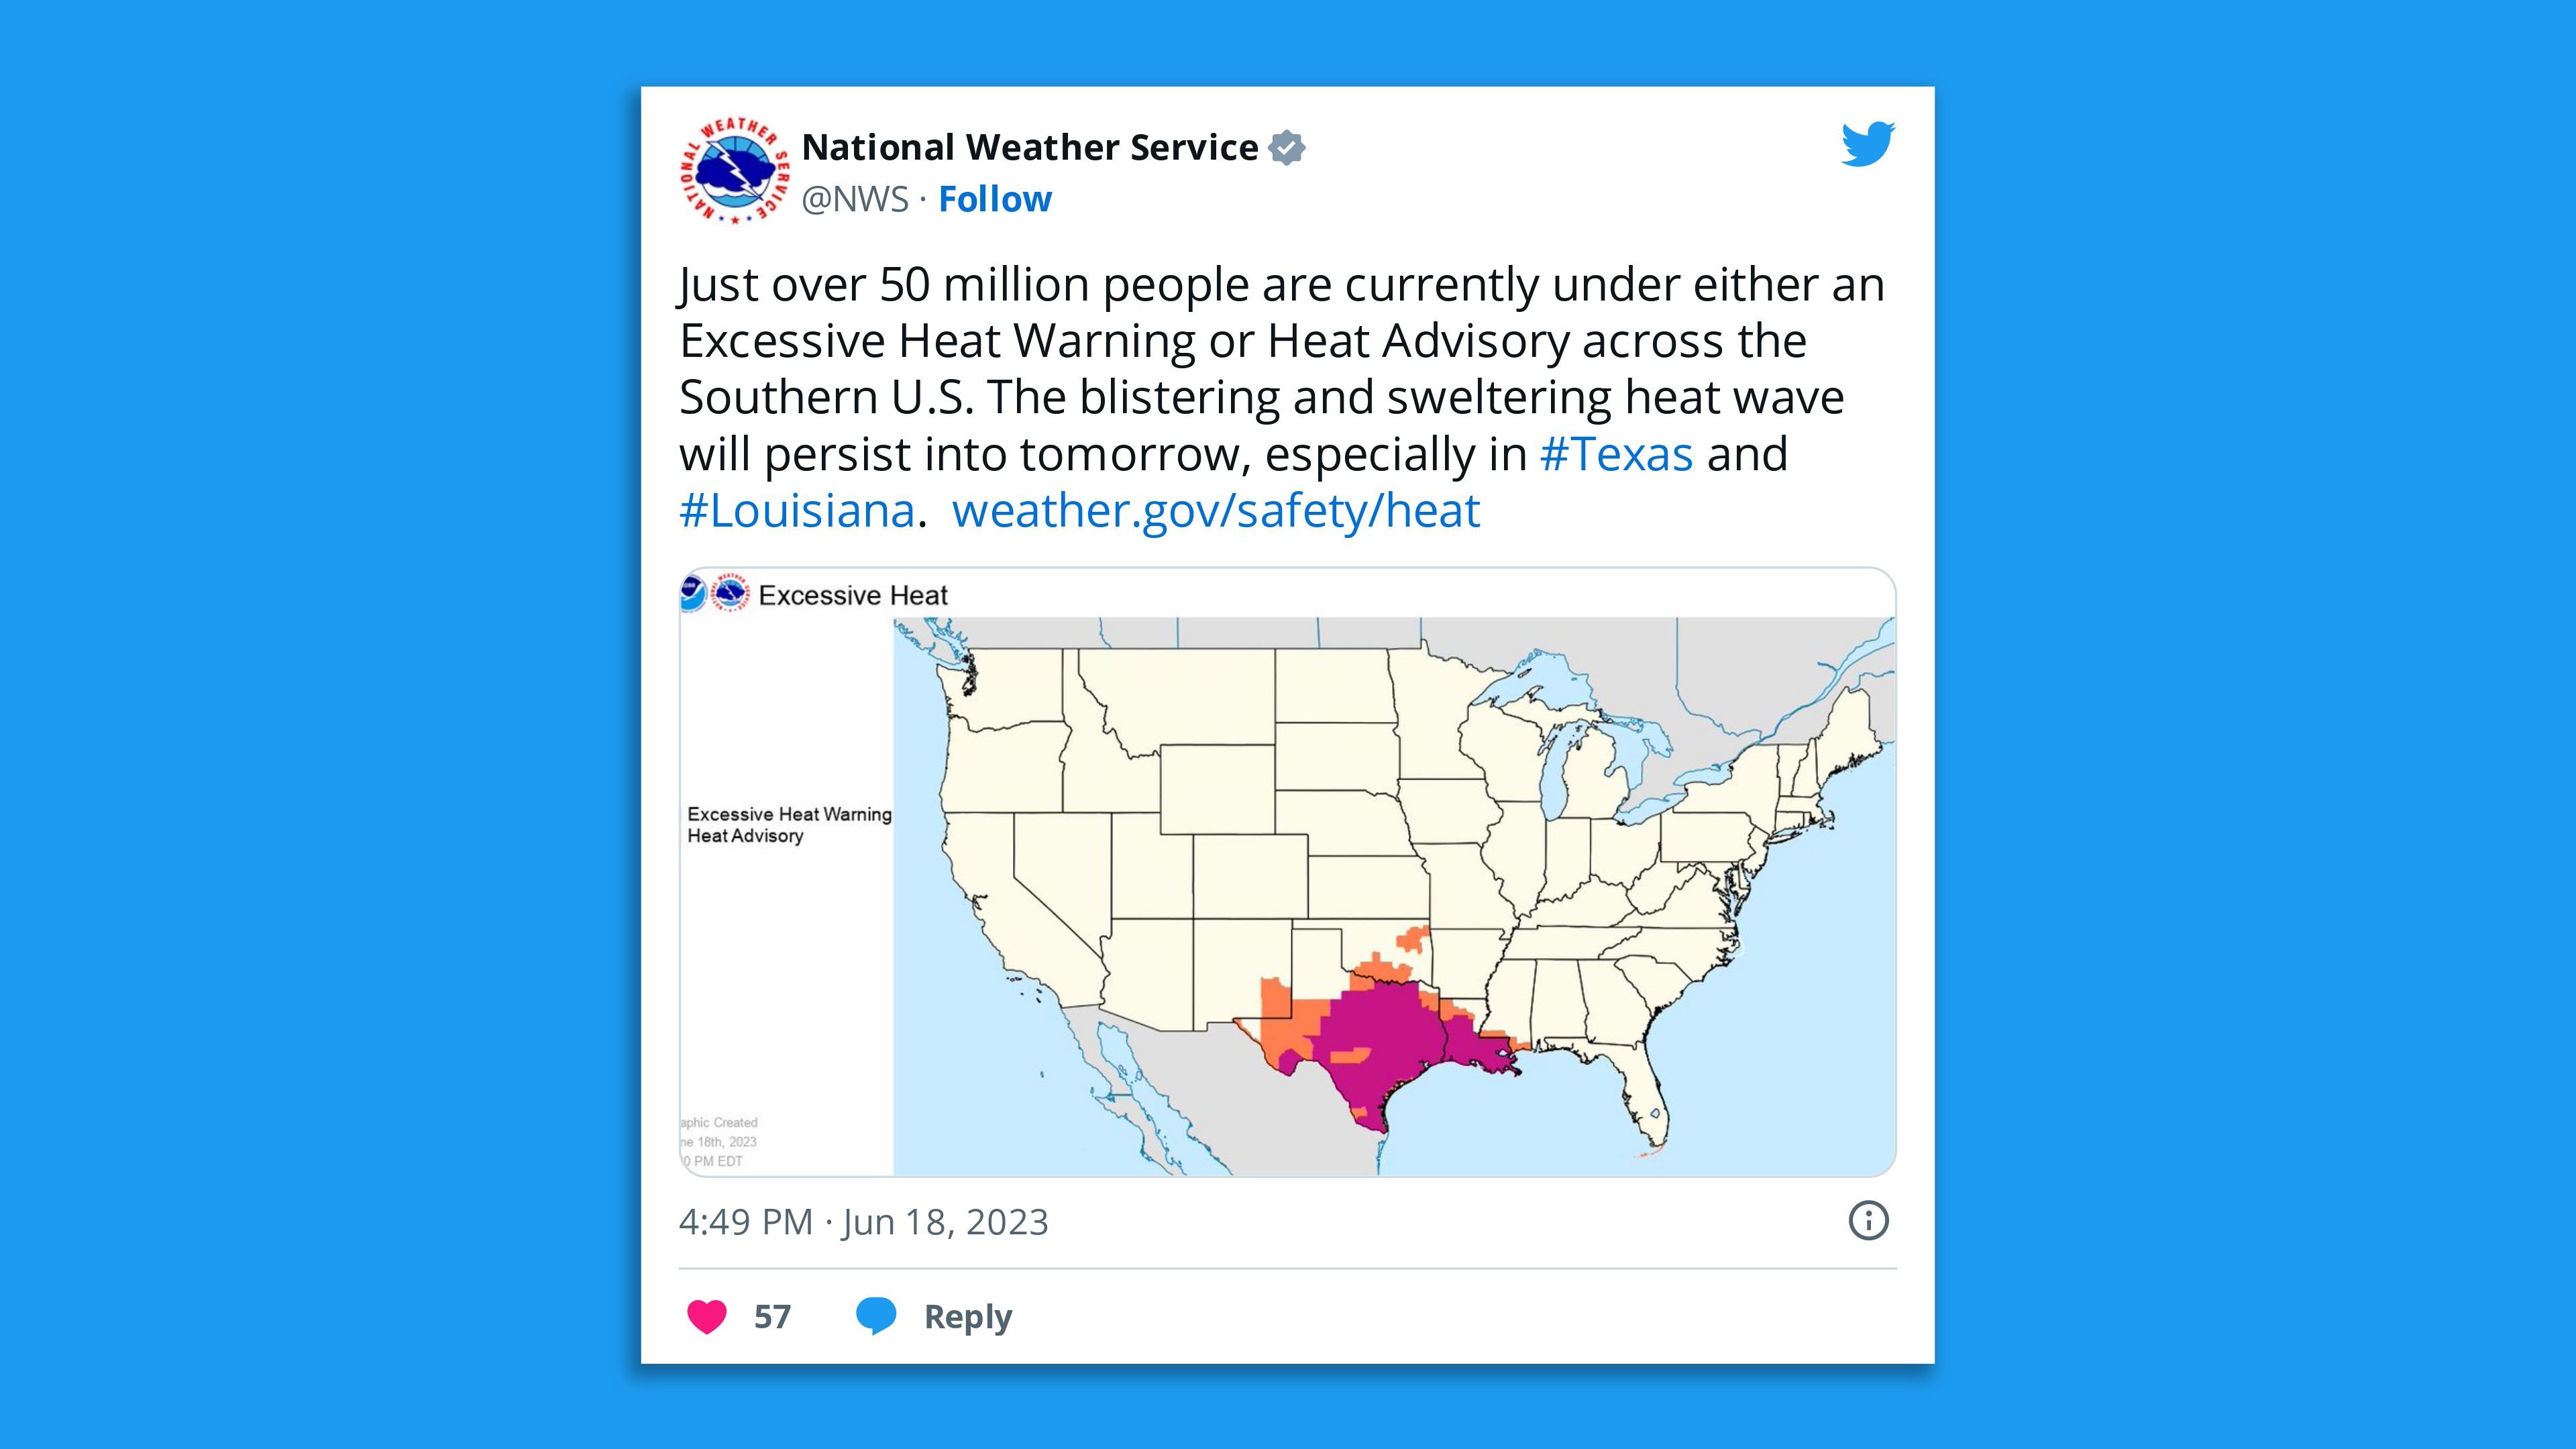 A screenshot of an NWS tweet saying: "Excessive Heat Warnings and Heat Advisories are in place across the western and central Gulf Coast where temperatures in the 100s will not only rival daily high temperature marks for the nation, but may tie or break existing records."